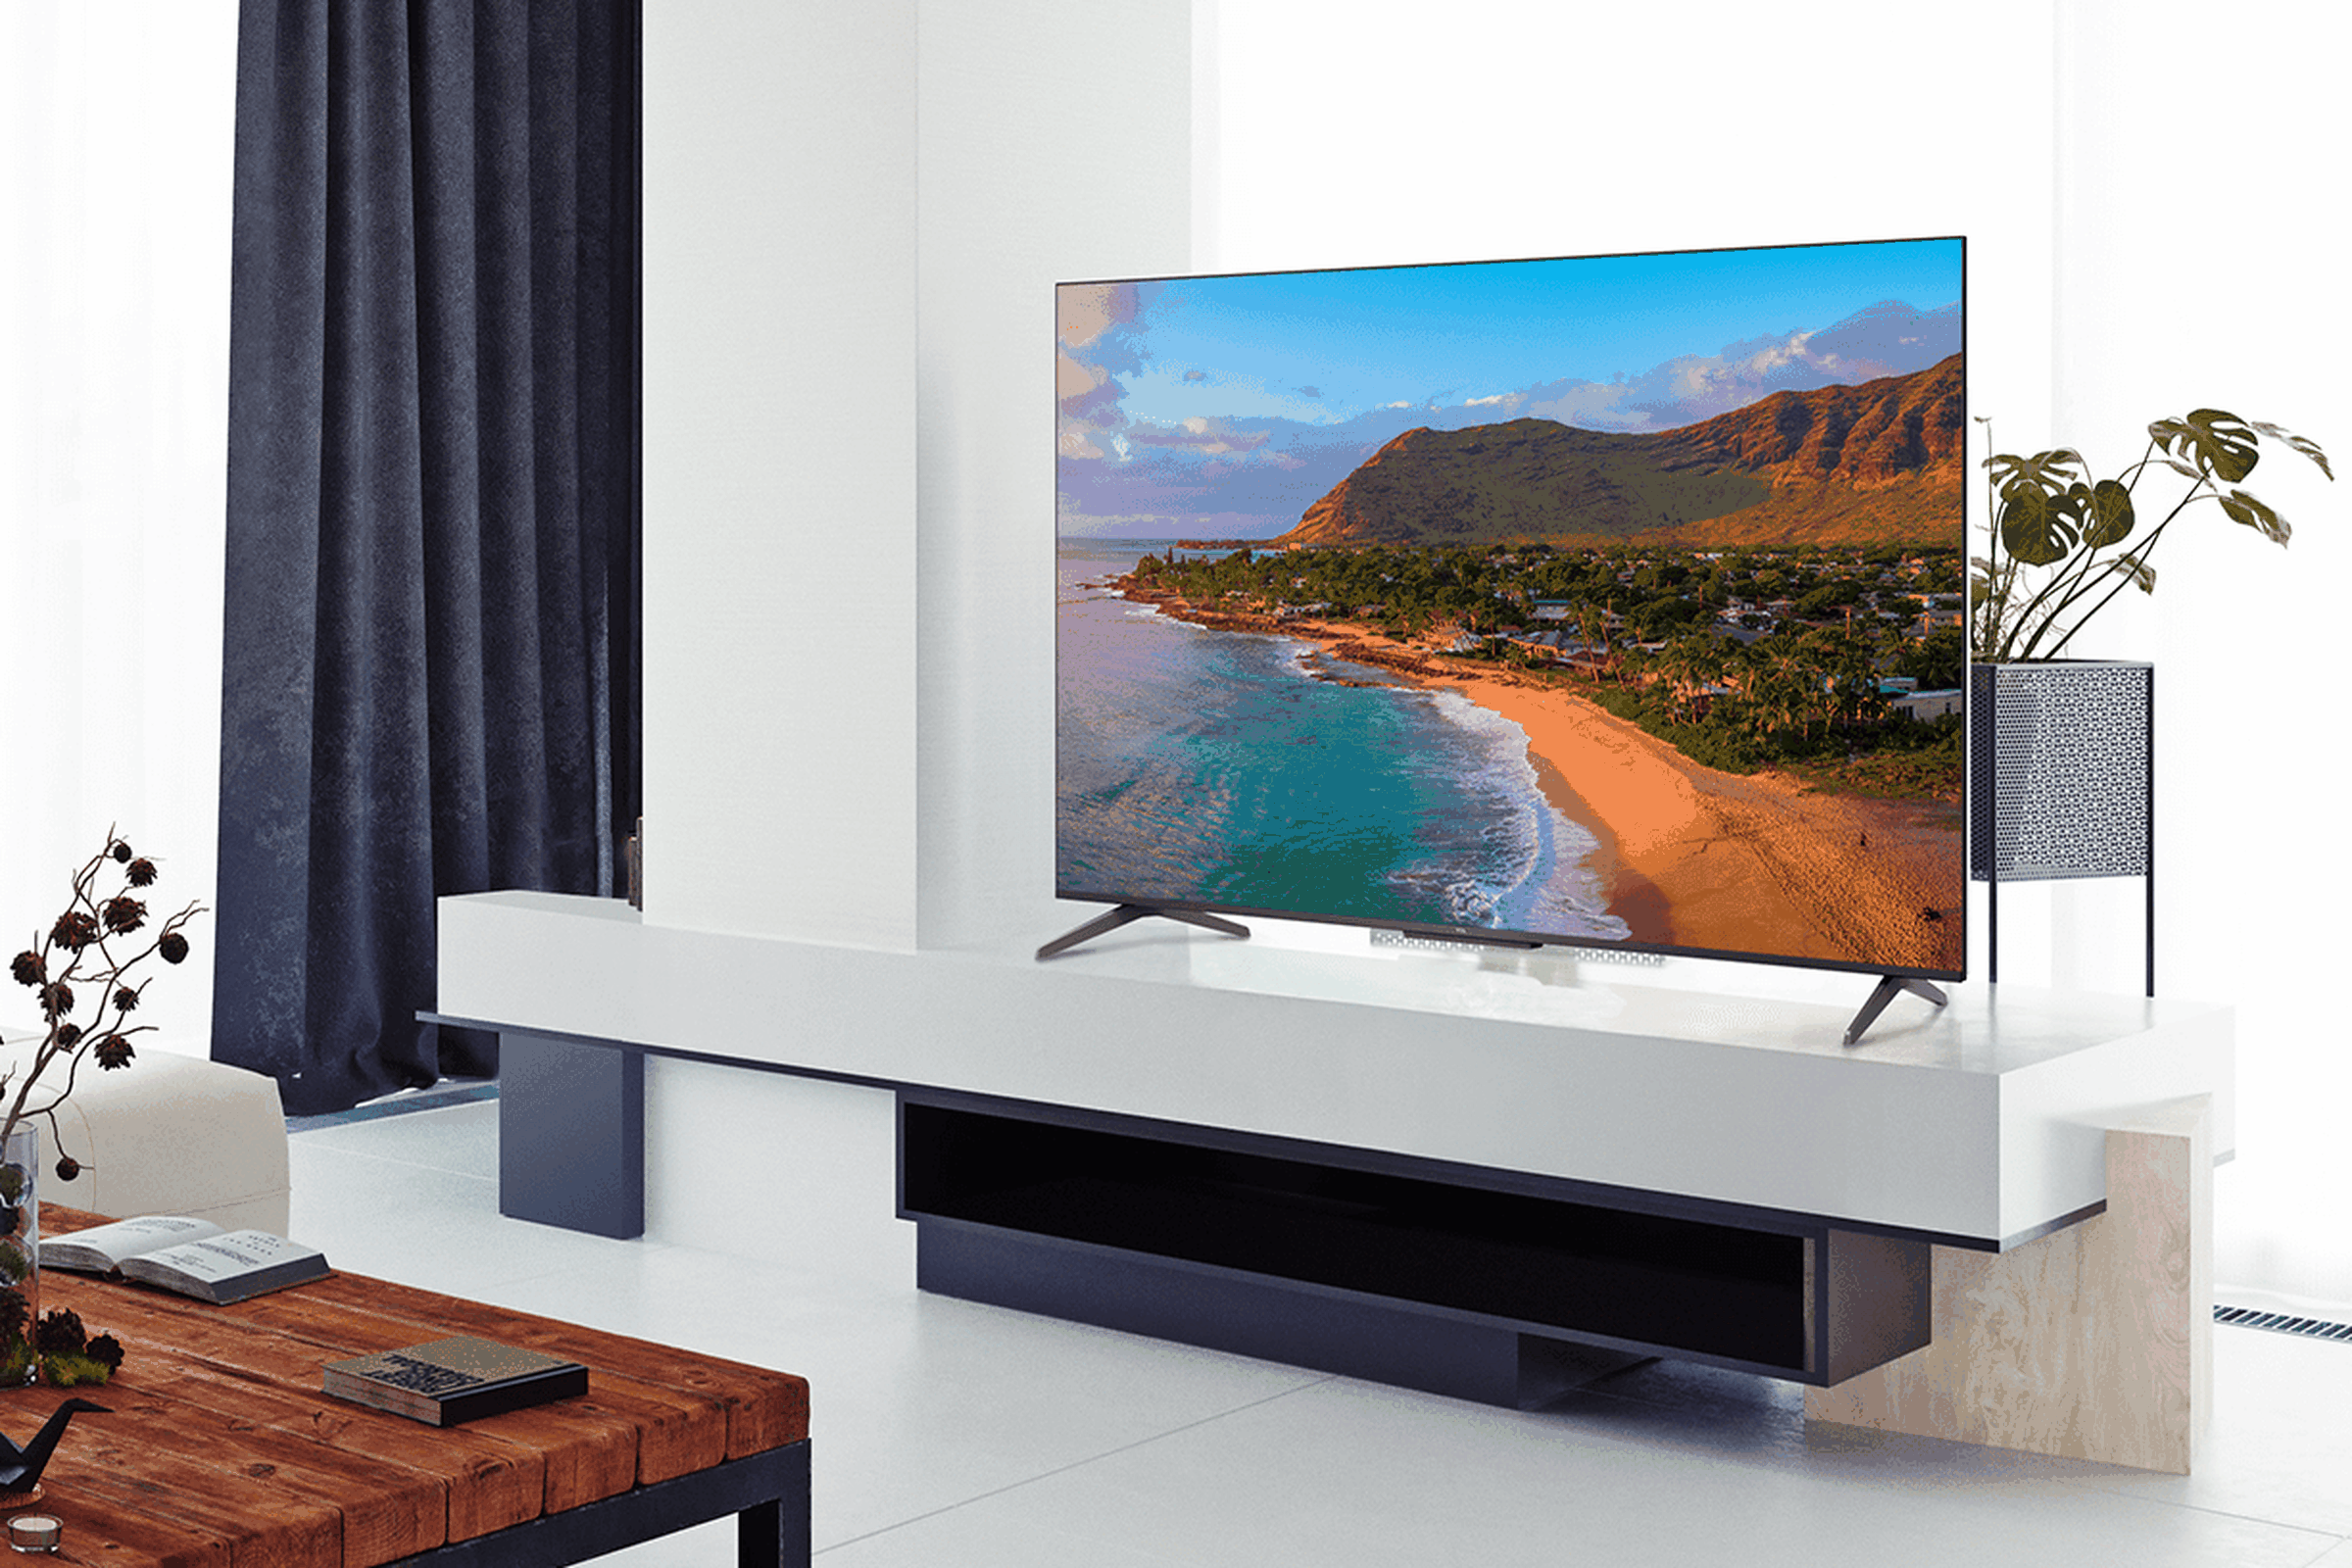 A lifestyle shot of the 65-inch TCL 5-Series QLED TV in a living room.